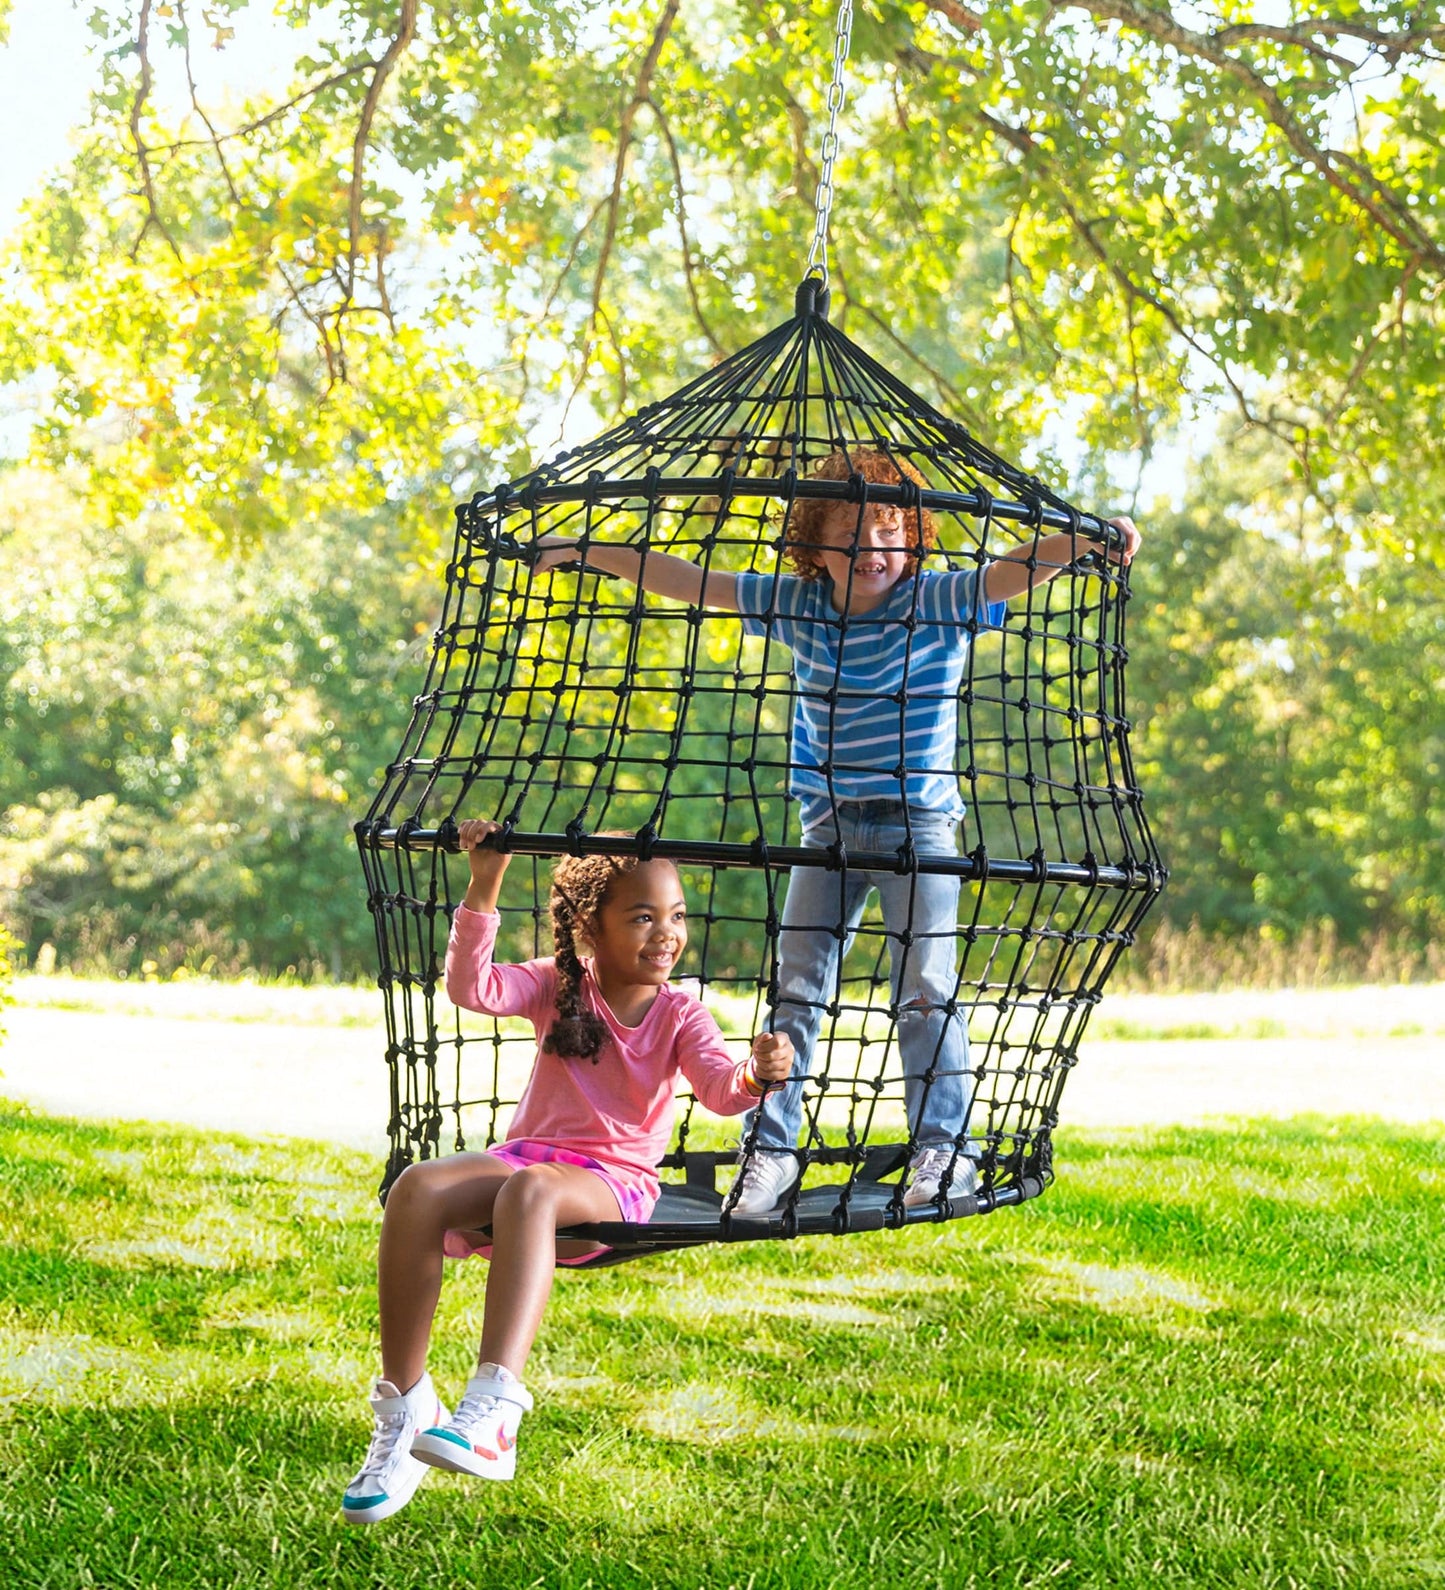 50-Inch Playful Rope HangOut Climber Swing